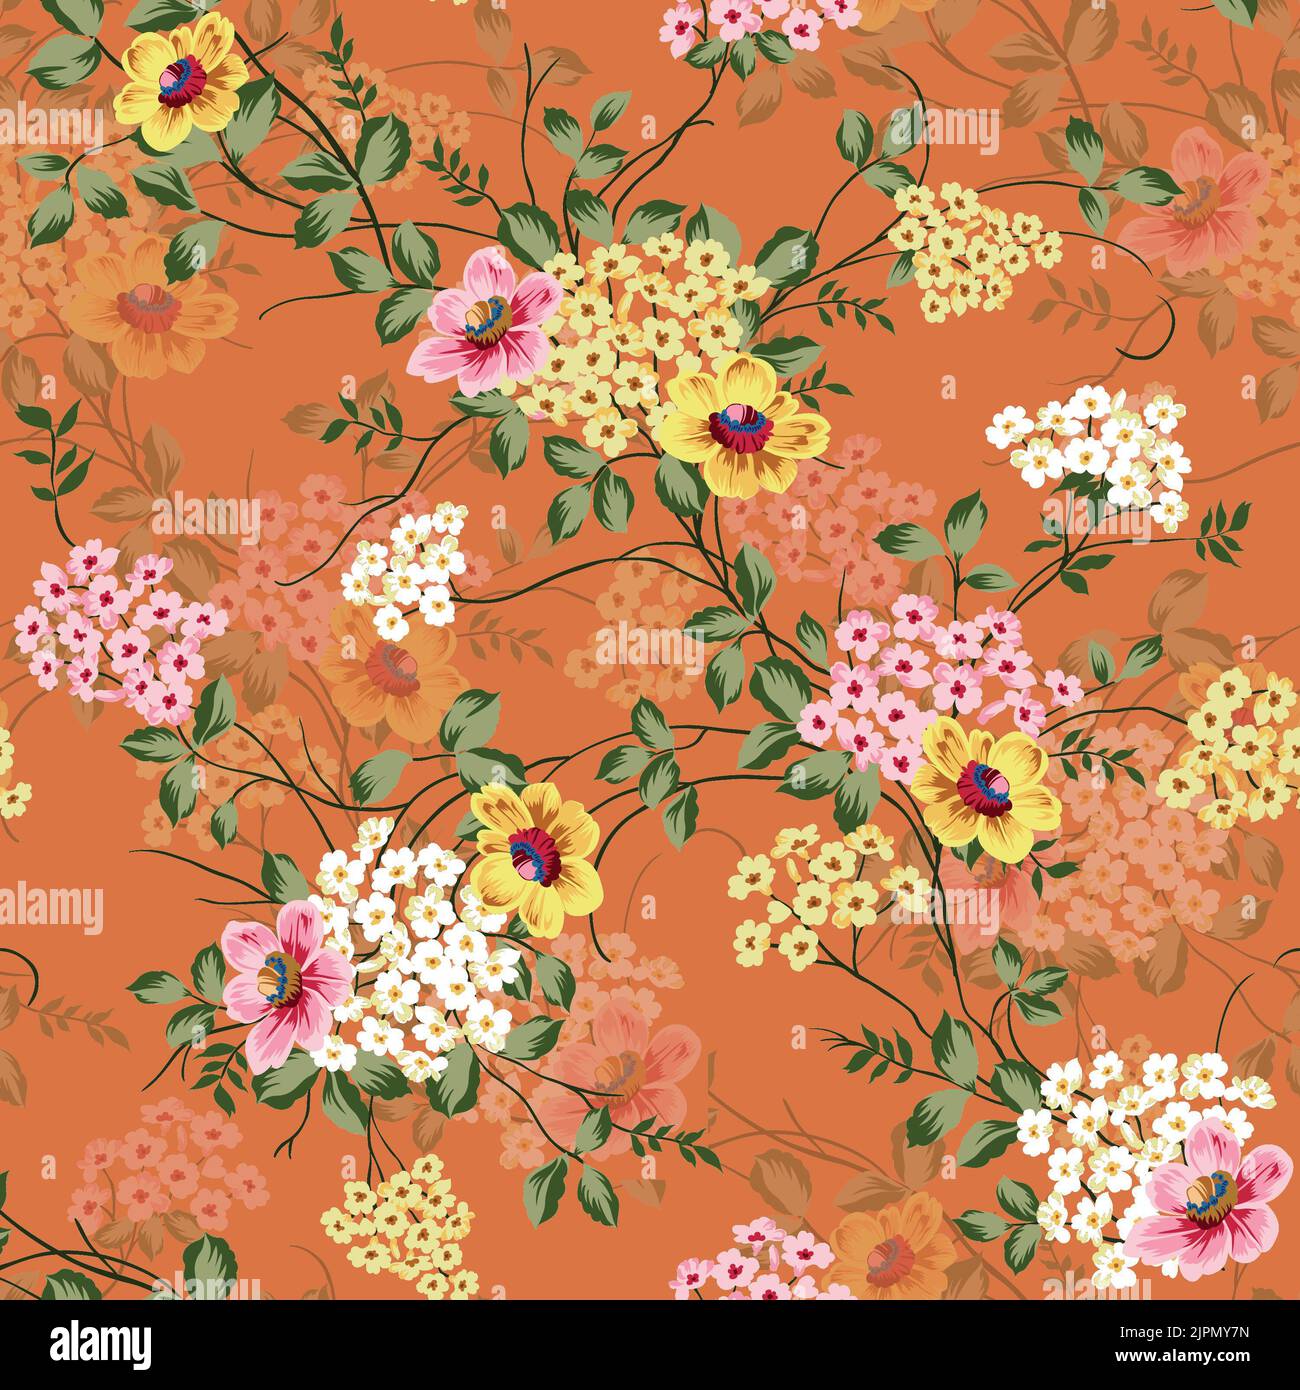 floral all over design Stock Photo